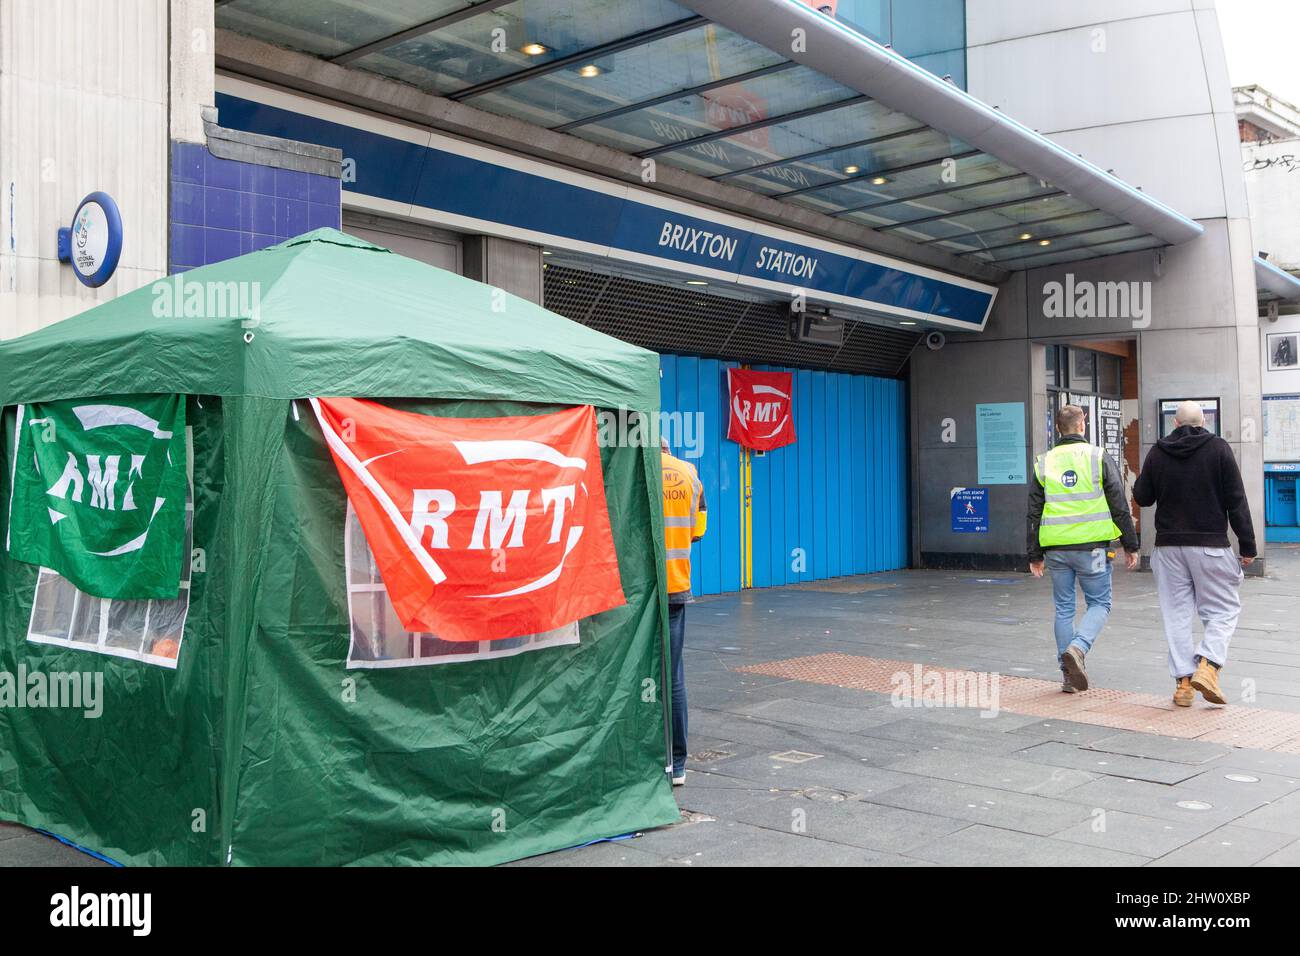 London, UK, 3 March 2022: RMT union pickets holding a tube strike at Brixton station. This is the second strike day this week after unions and Transport for London failed to agree on various issues including pensions. Anna Watson/Alamy Live News Stock Photo